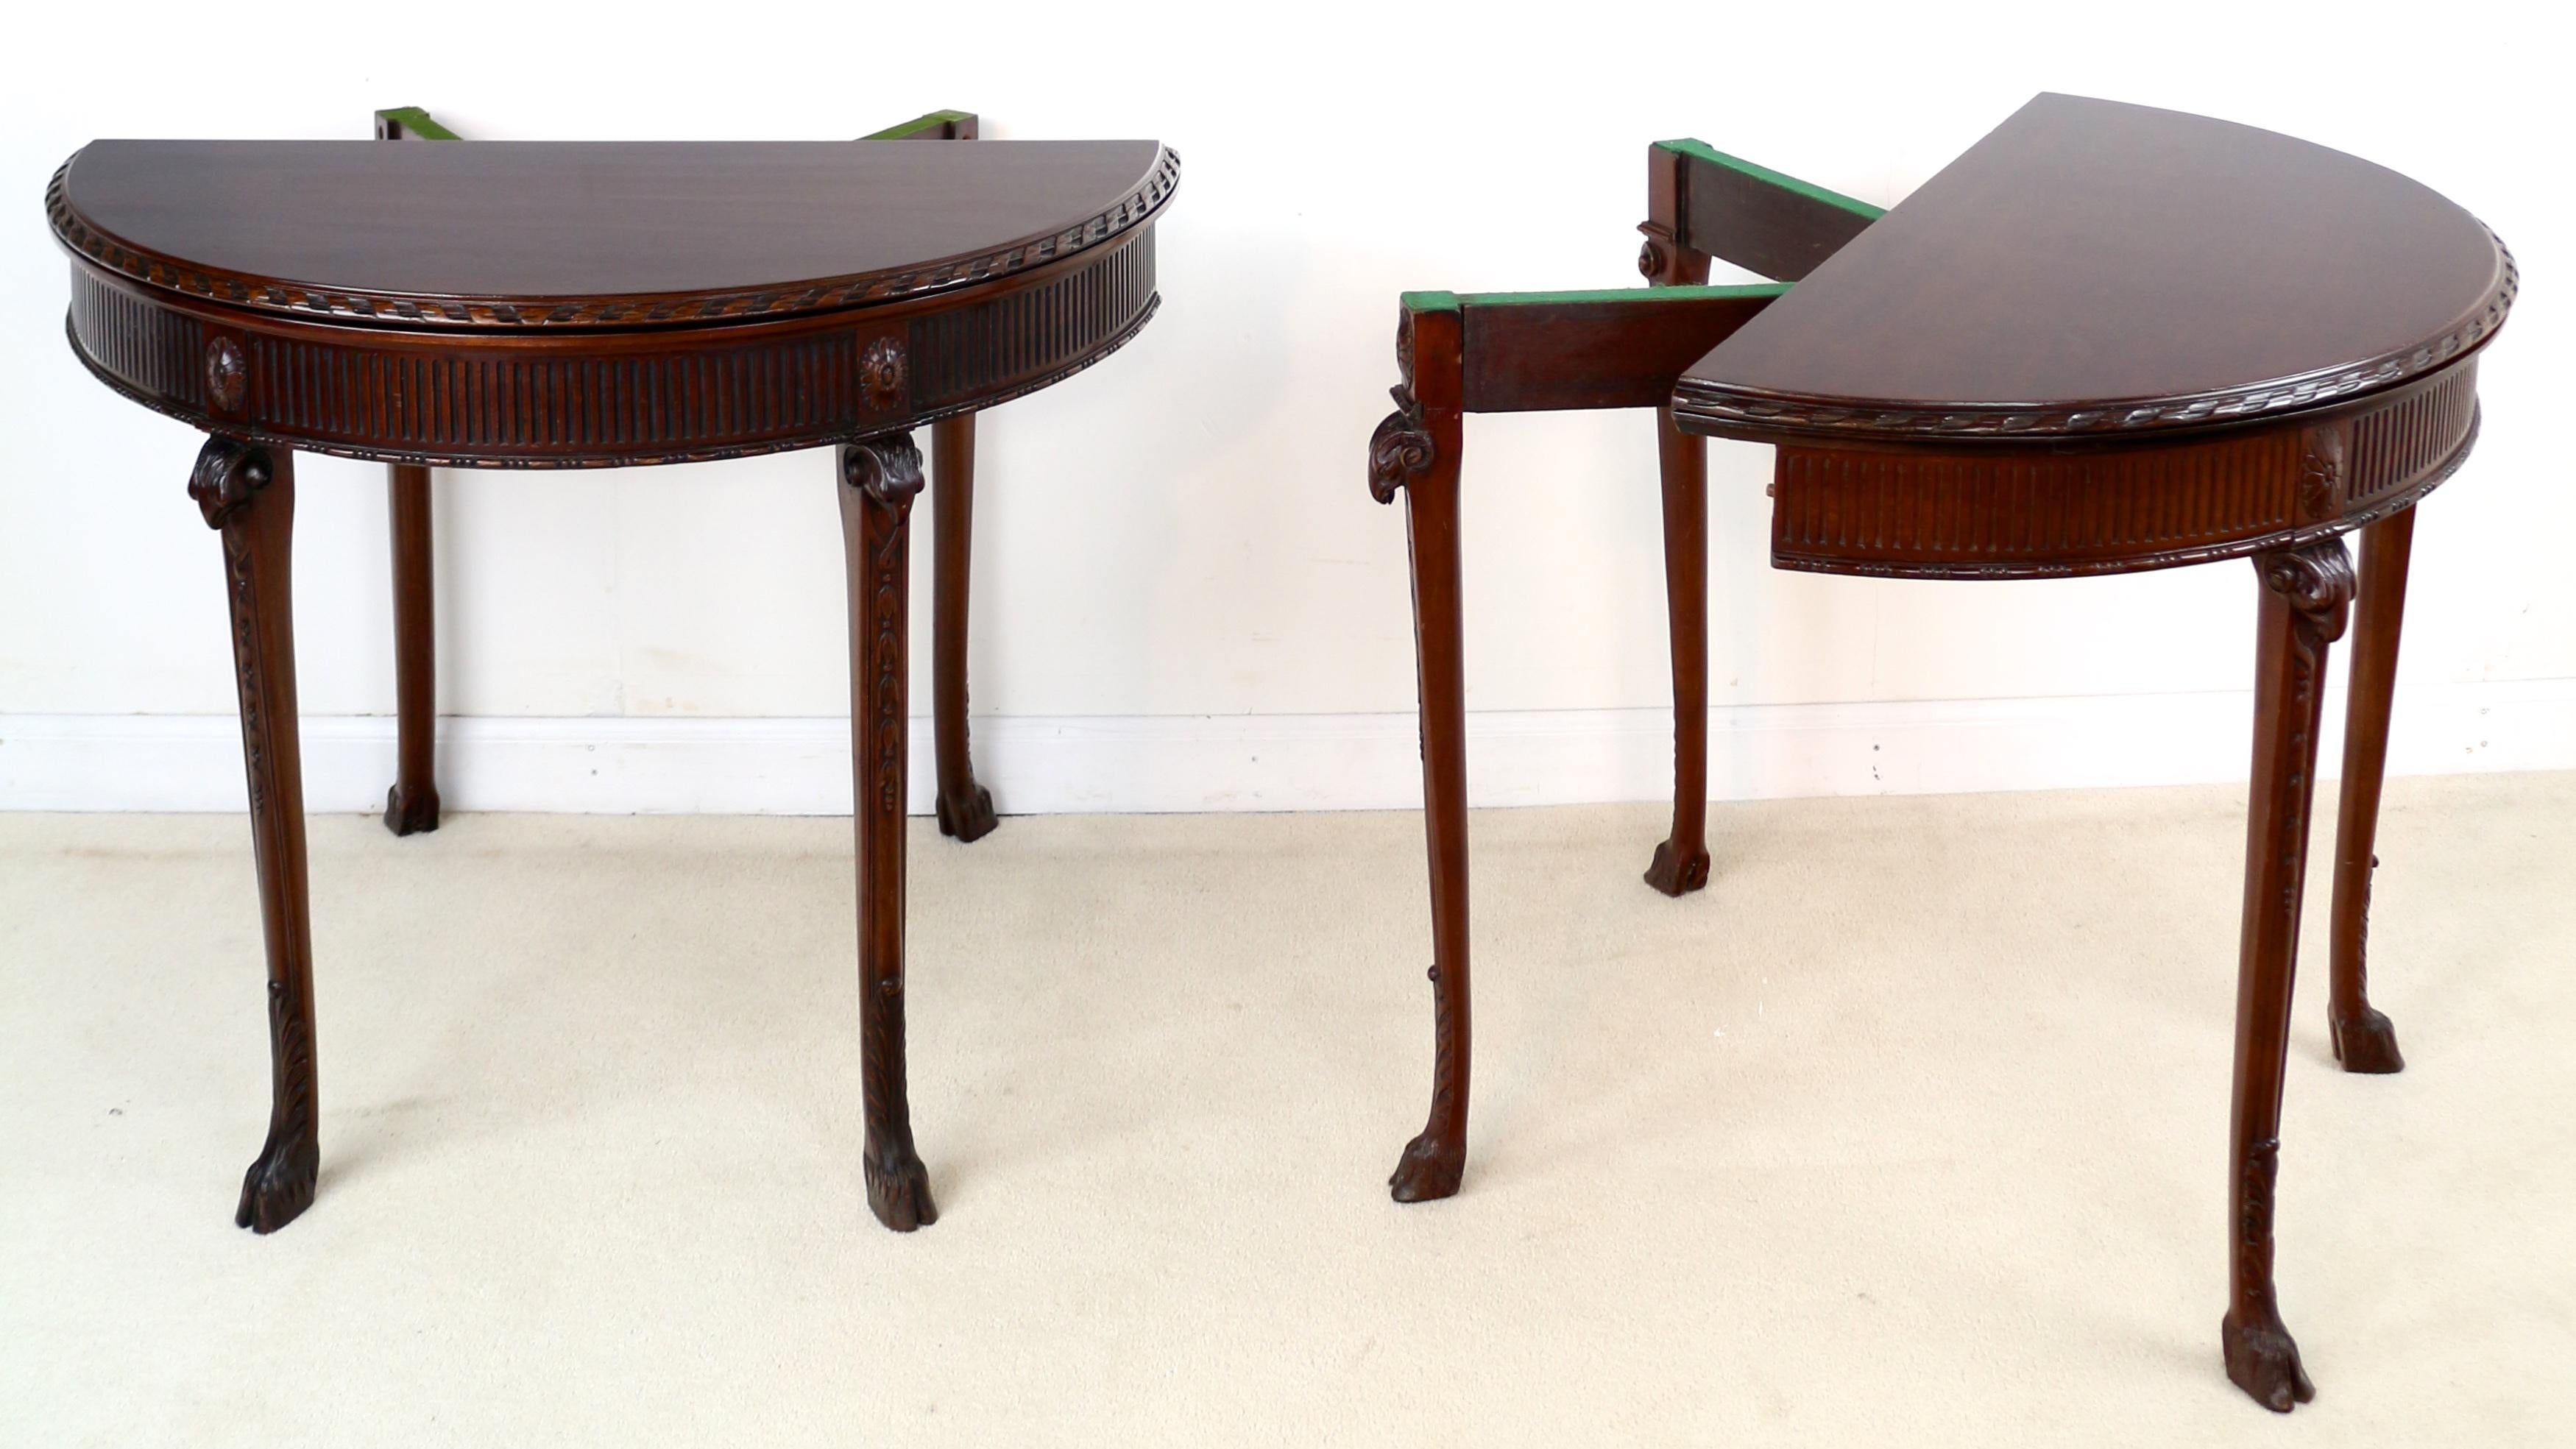 Early 20th Century Pair of George III Neoclassical Style Mahogany Demi-Lune Card Tables, circa 1900